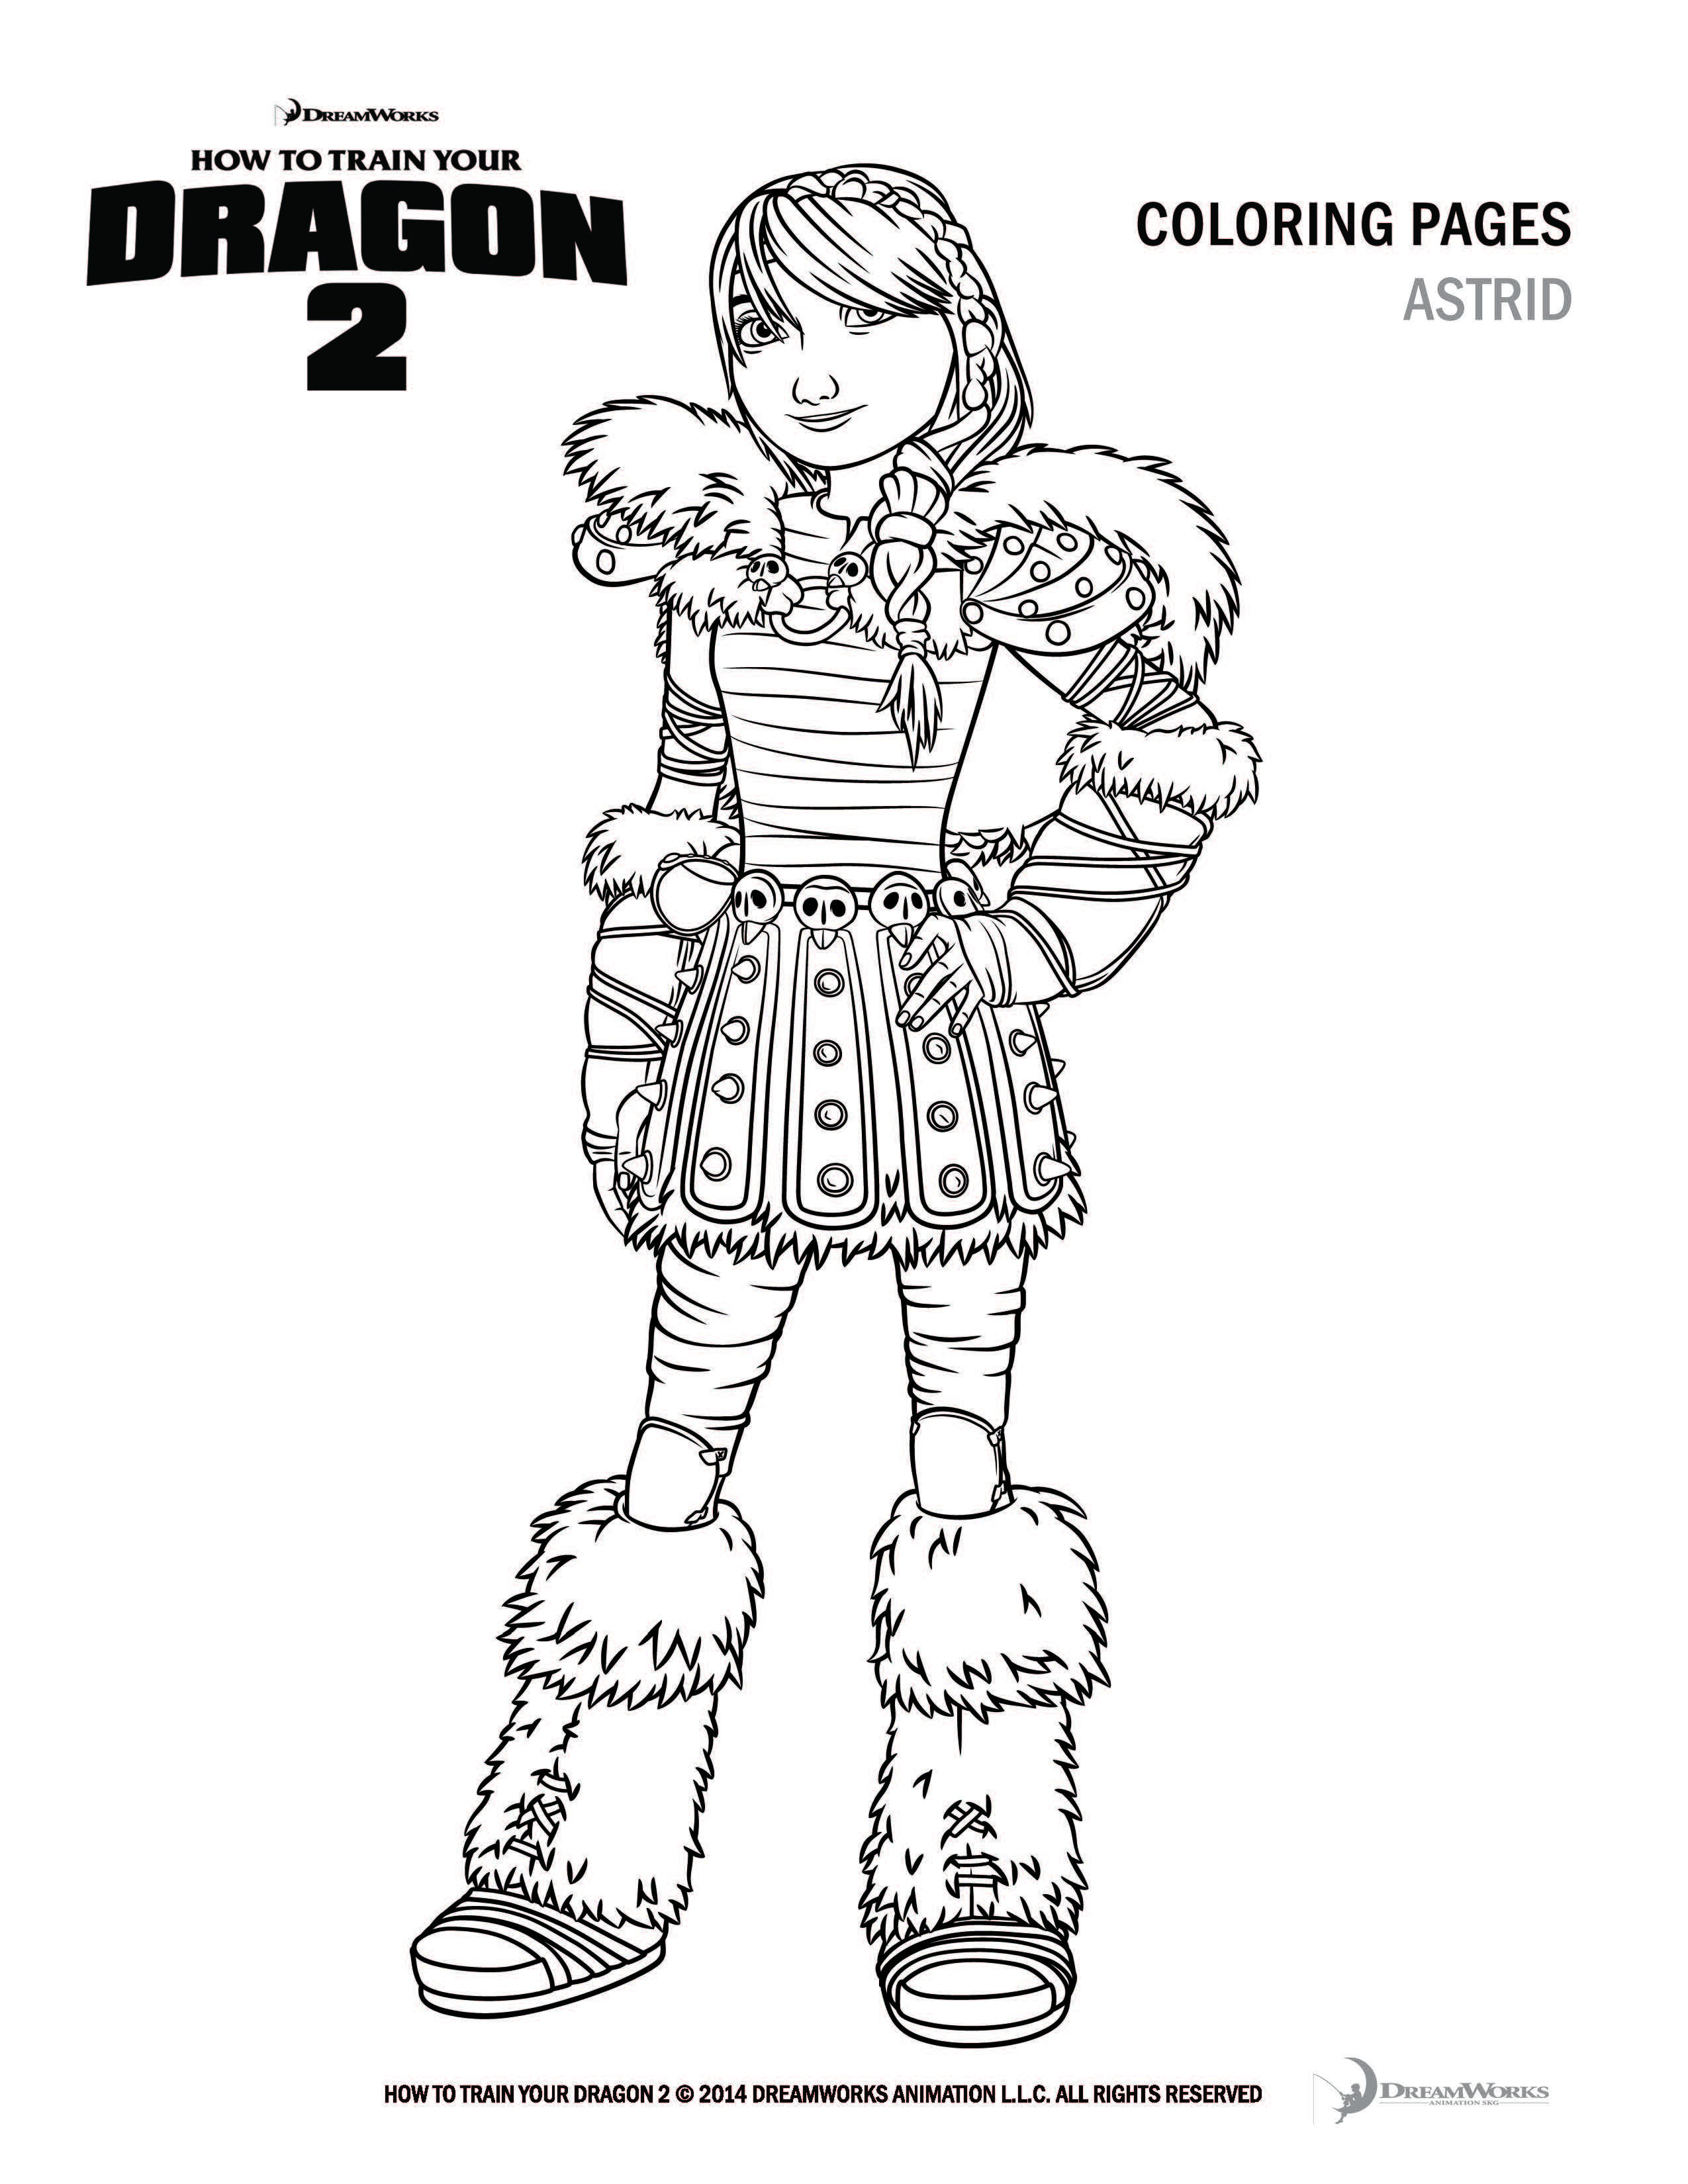 How To Train Your Dragon Coloring Pages
 How to Train Your Dragon 2 coloring pages and activity sheets